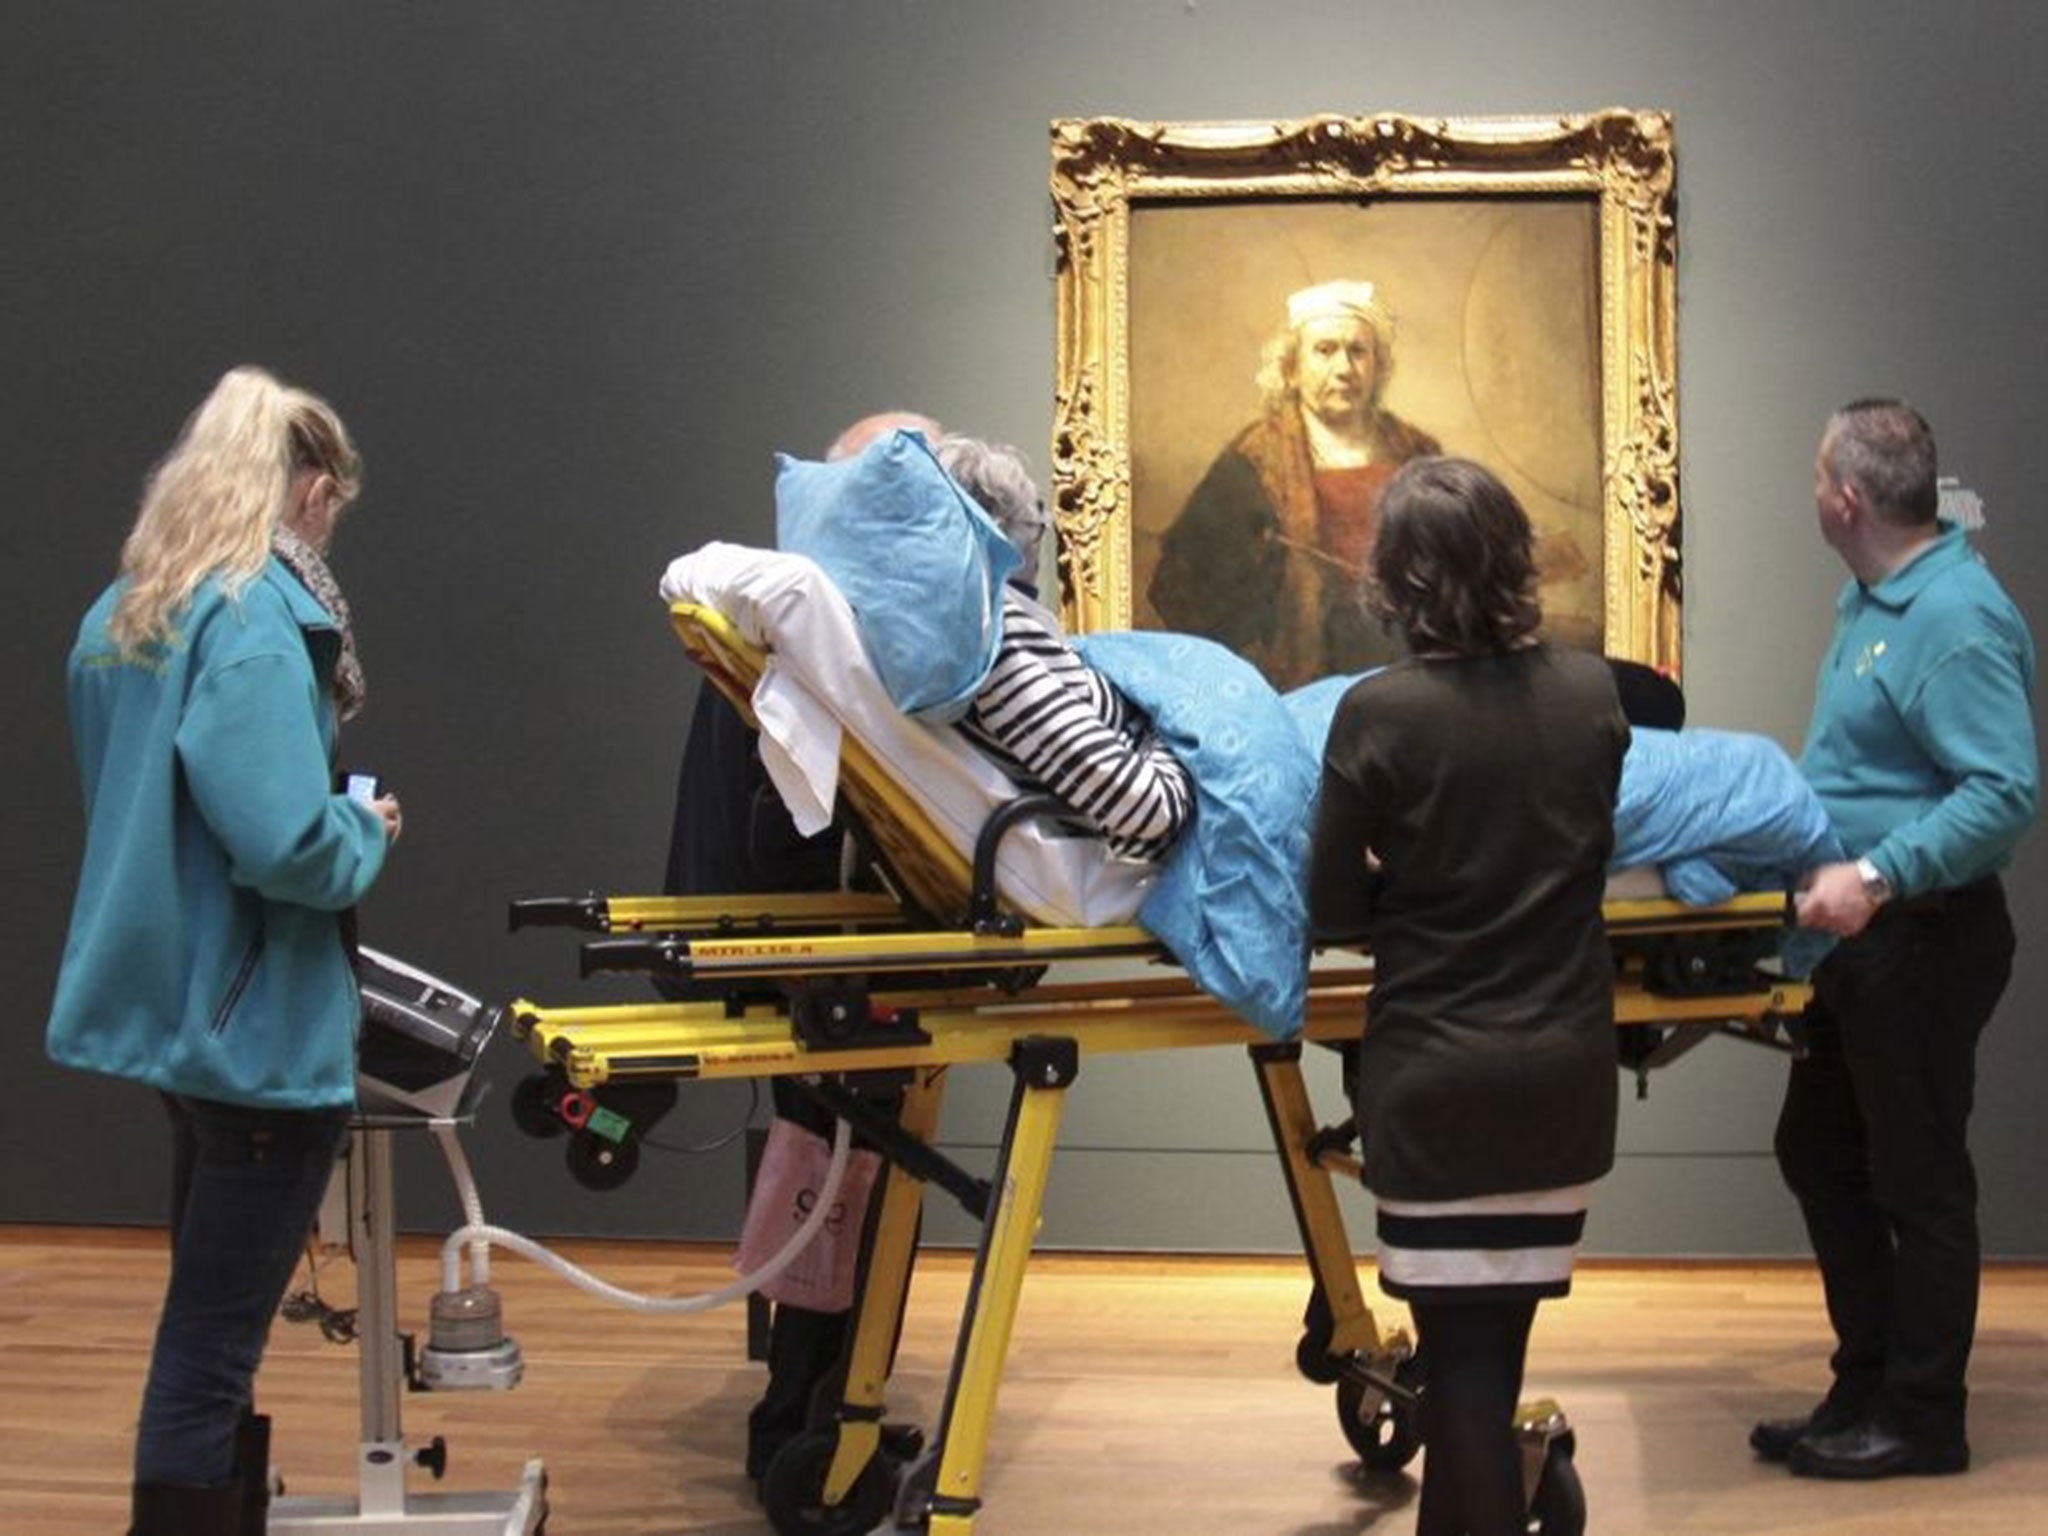 A terminally ill woman looks at a self portrait of Rembrandt at Amsterdam's Rijksmuseum